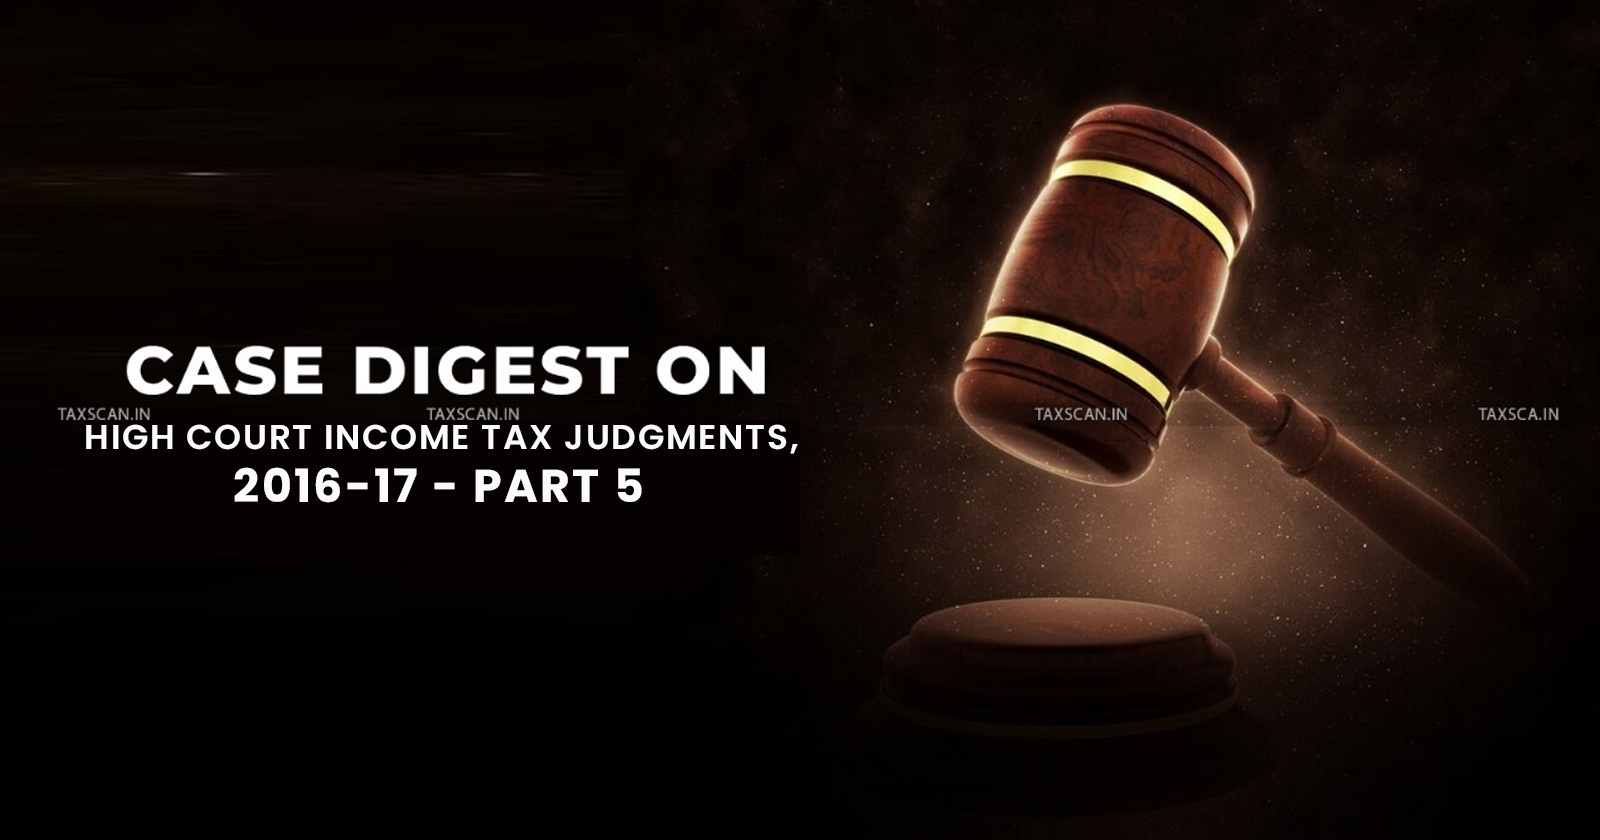 CASE DIGEST ON HIGH COURT INCOME TAX JUDGMENTS - CASE DIGEST - HIGH COURT - INCOME TAX JUDGMENTS - INCOME TAX - Income Tax News - Tax News - Tax Judgements - TAXSCAN